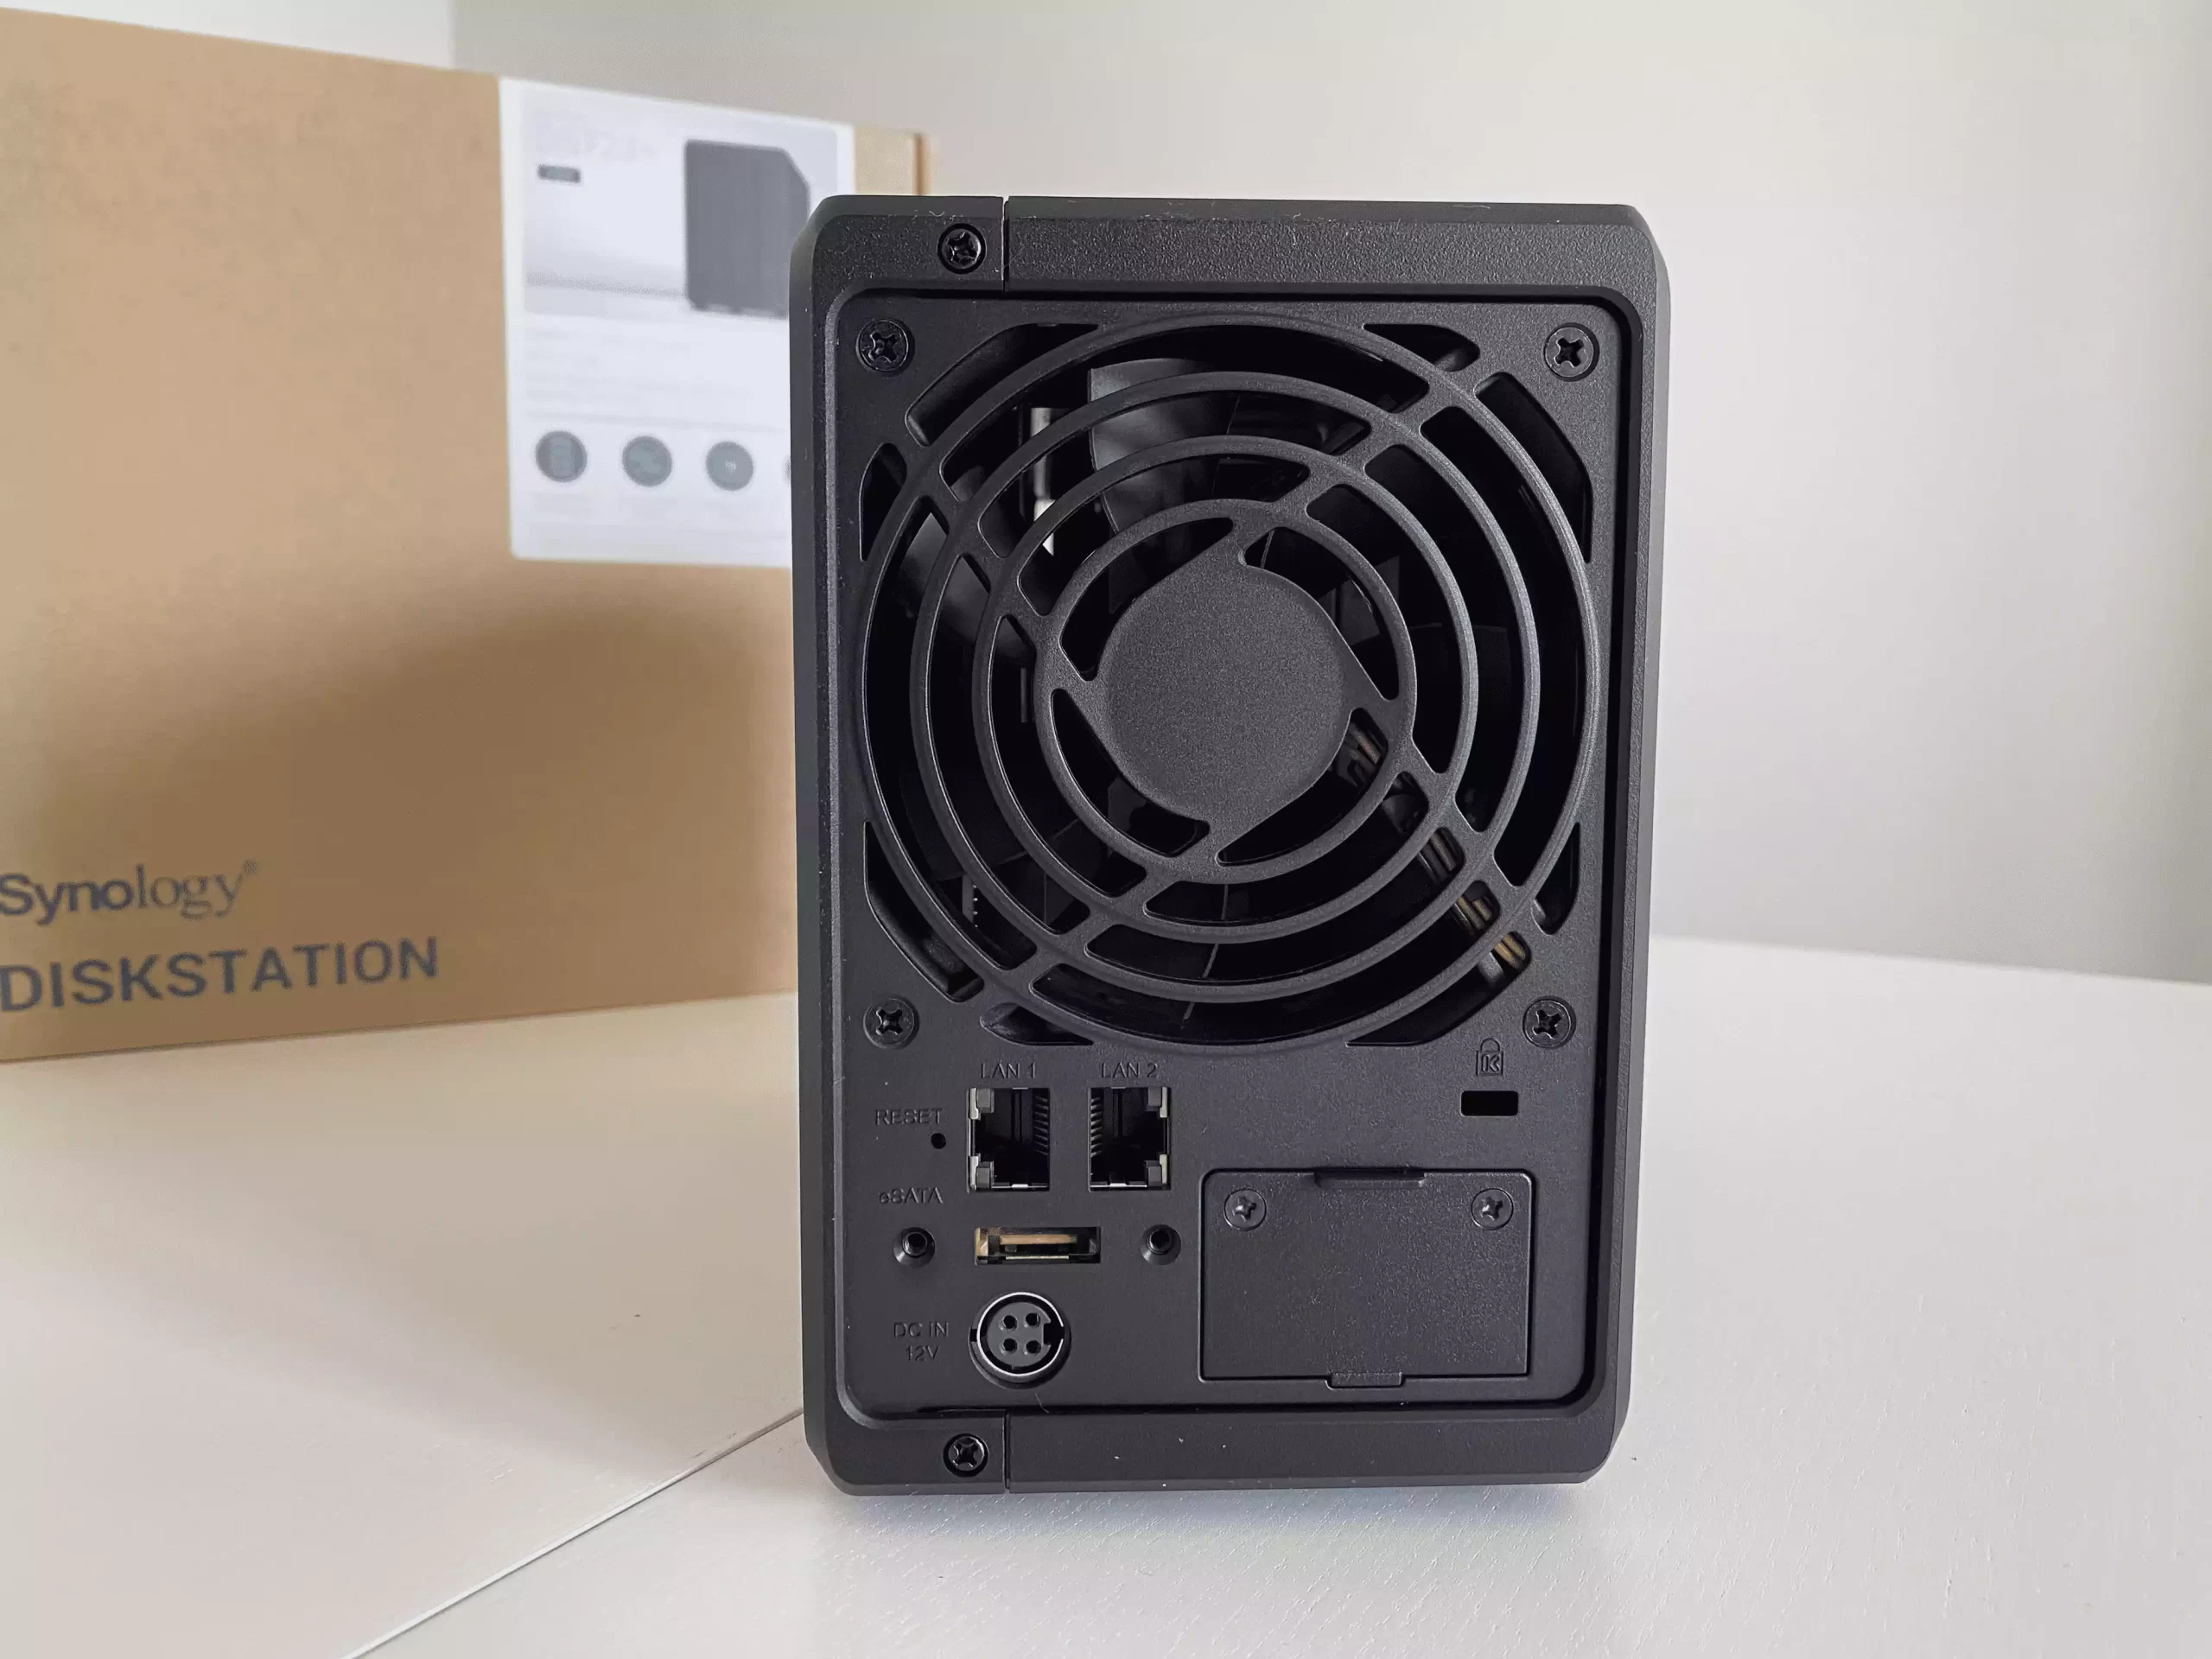 Synology DiskStation DS723+ review: Retaking the 2-bay NAS crown